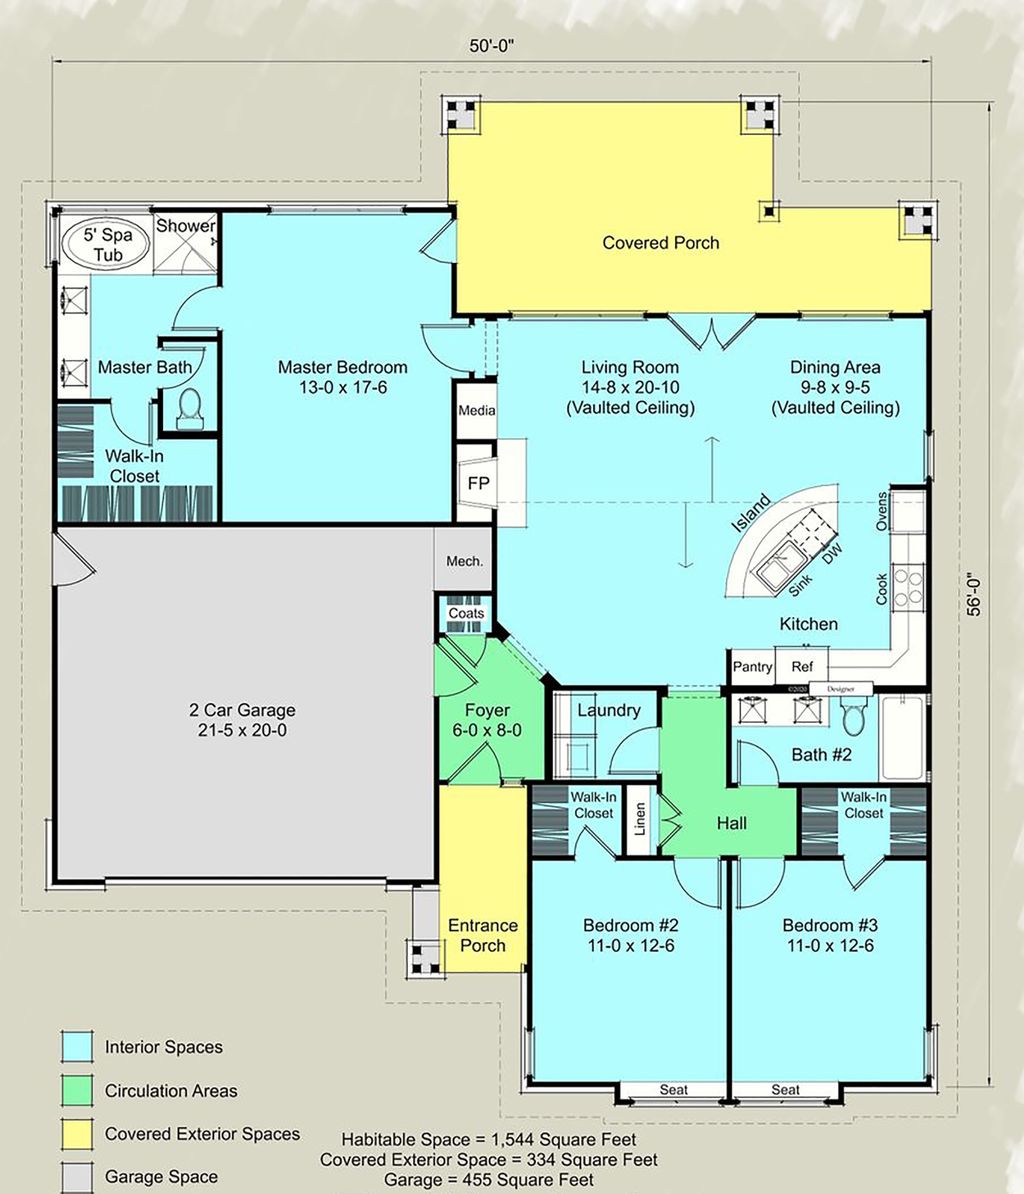 Ranch Style House Plan 4 Beds 3.5 Baths 2019 Sq/Ft Plan